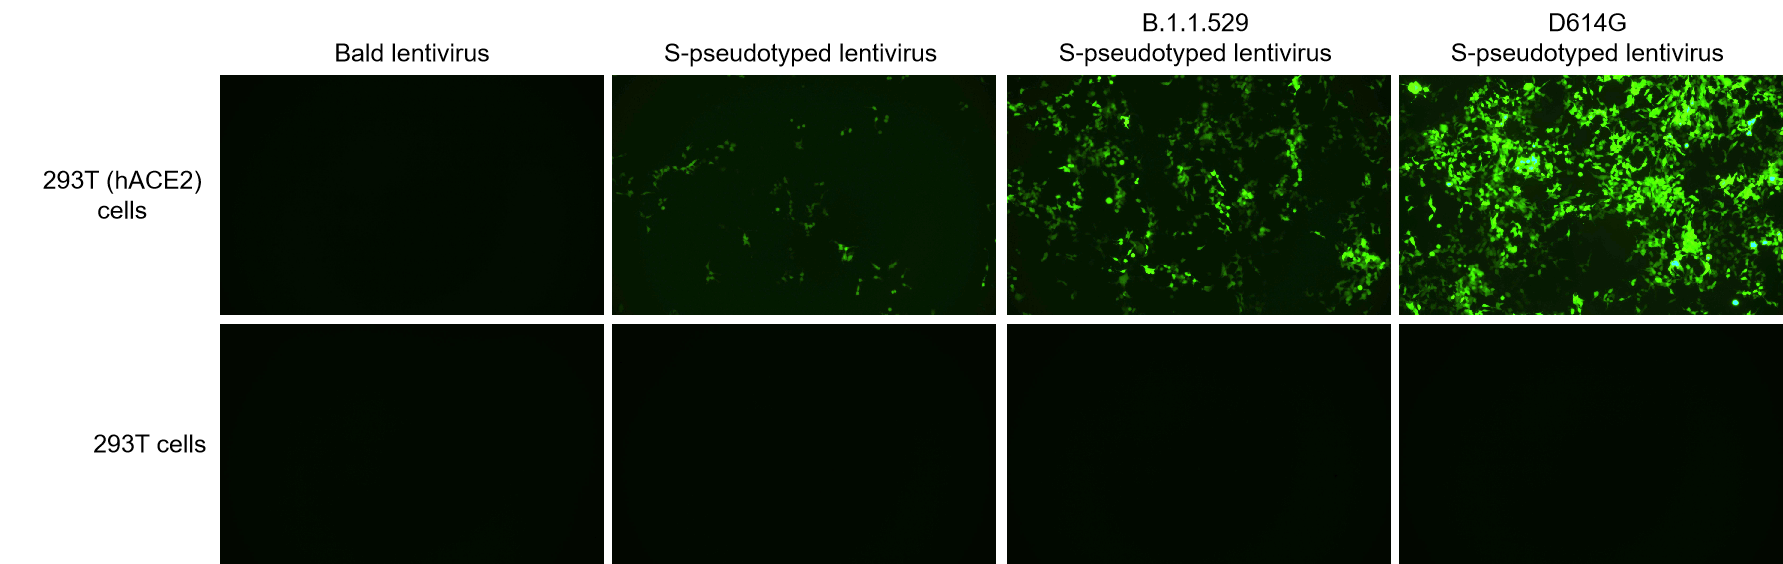 293T cell line transduced with SARS-CoV-2 S protein